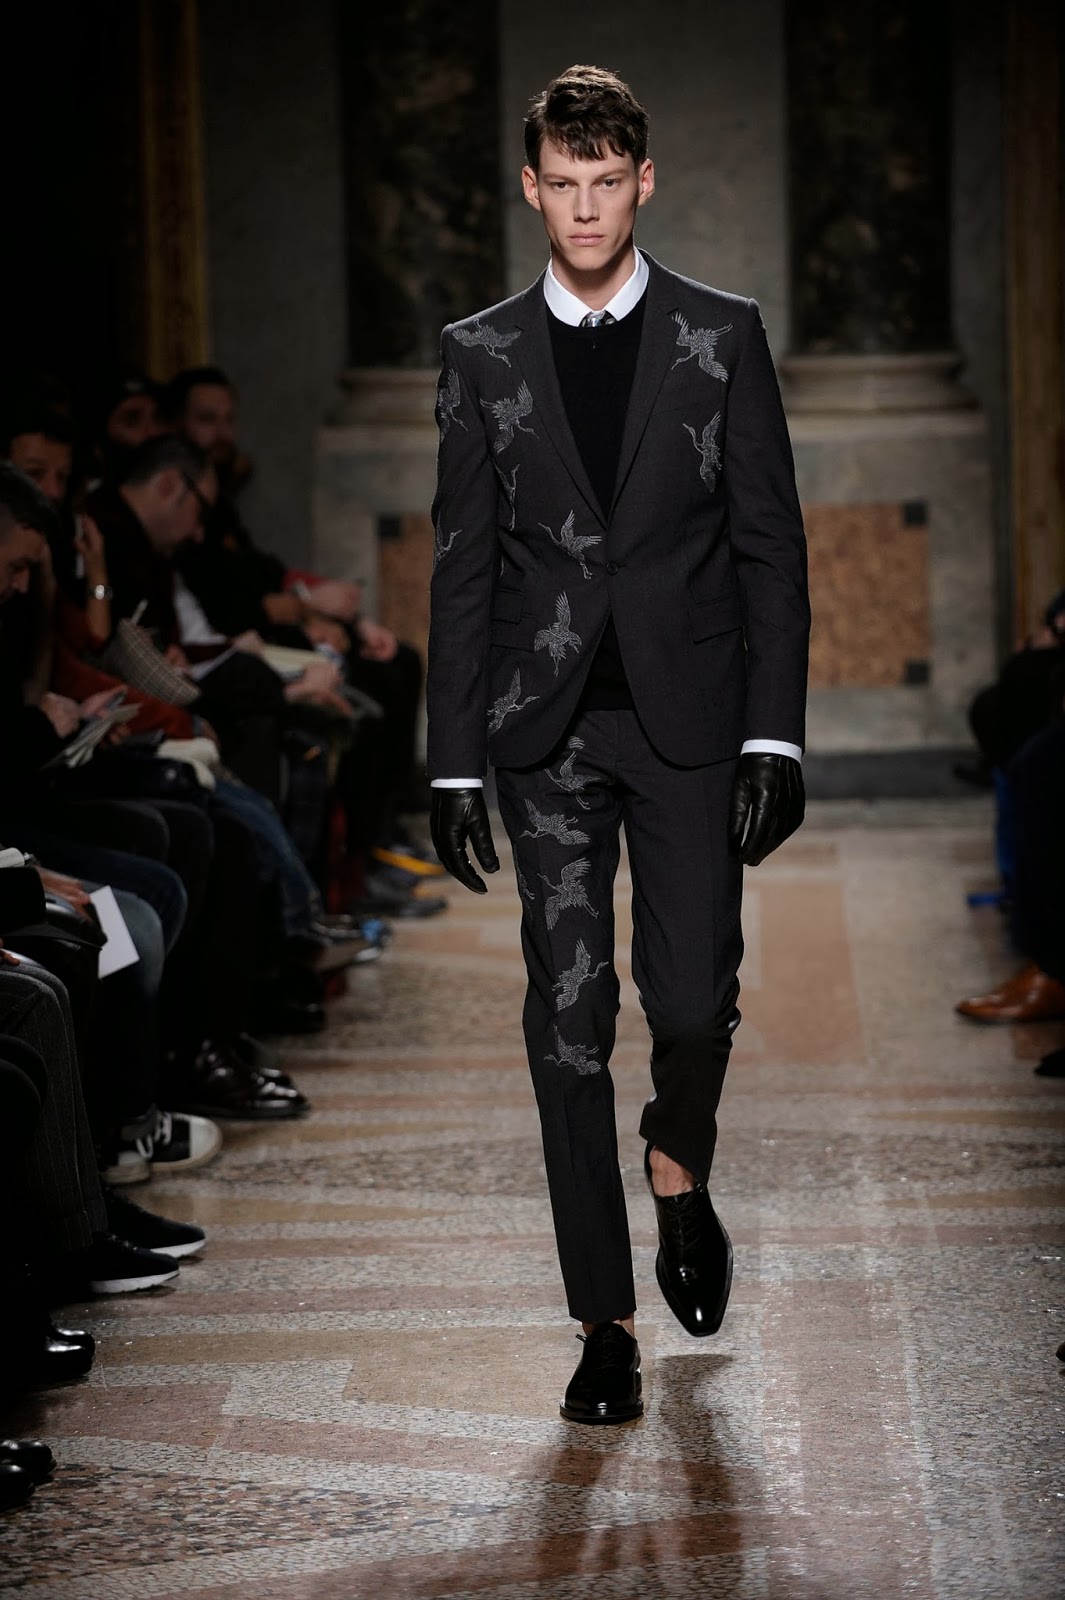 DIARY OF A CLOTHESHORSE: LES HOMMES AUTUMN - WINTER 14/15